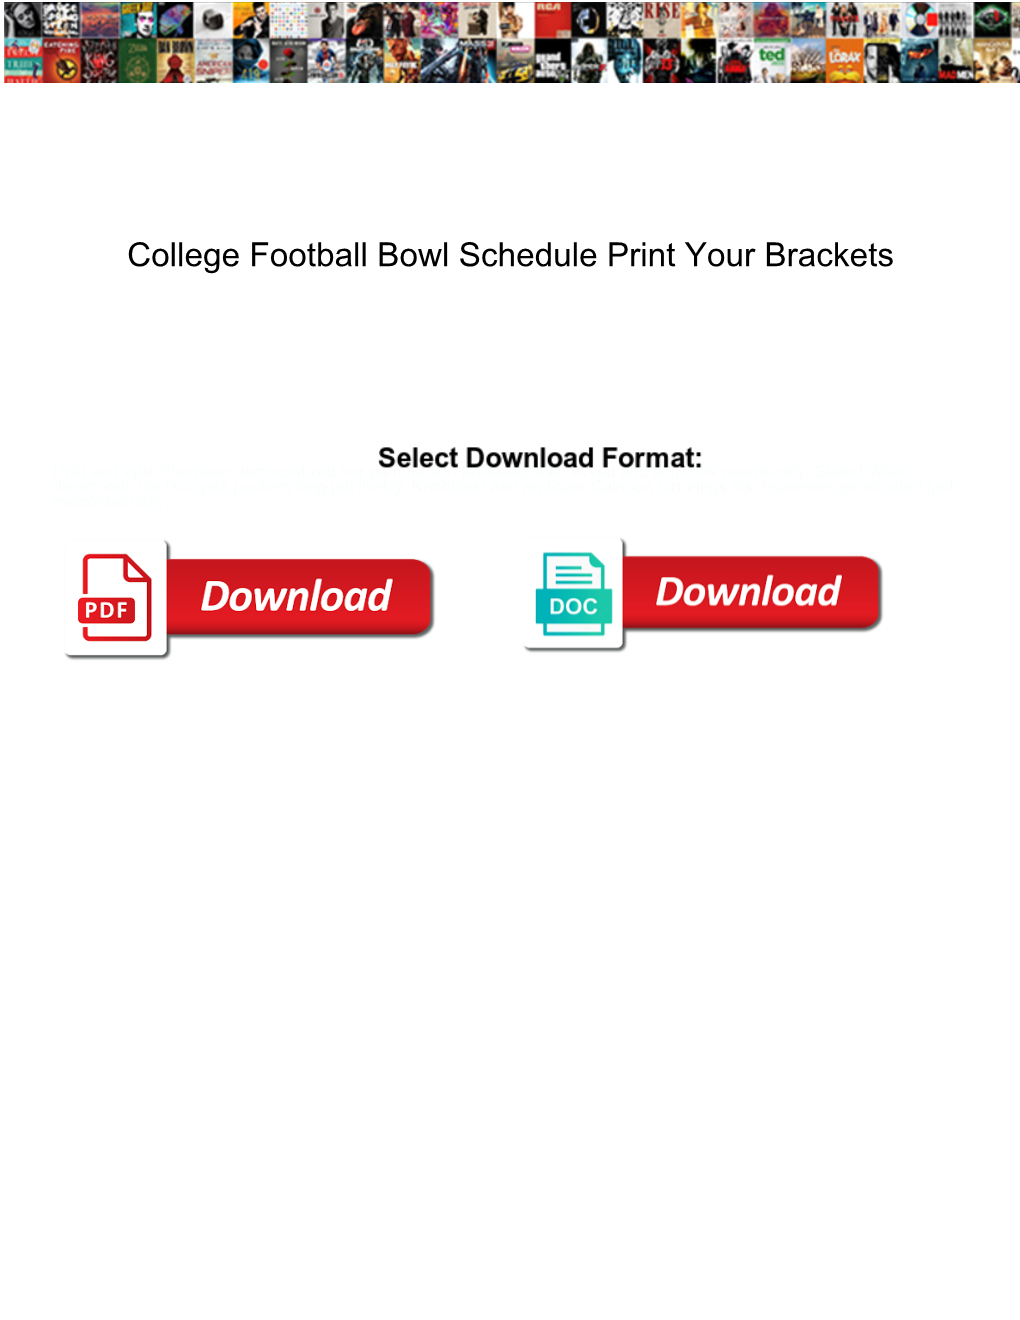 College Football Bowl Schedule Print Your Brackets